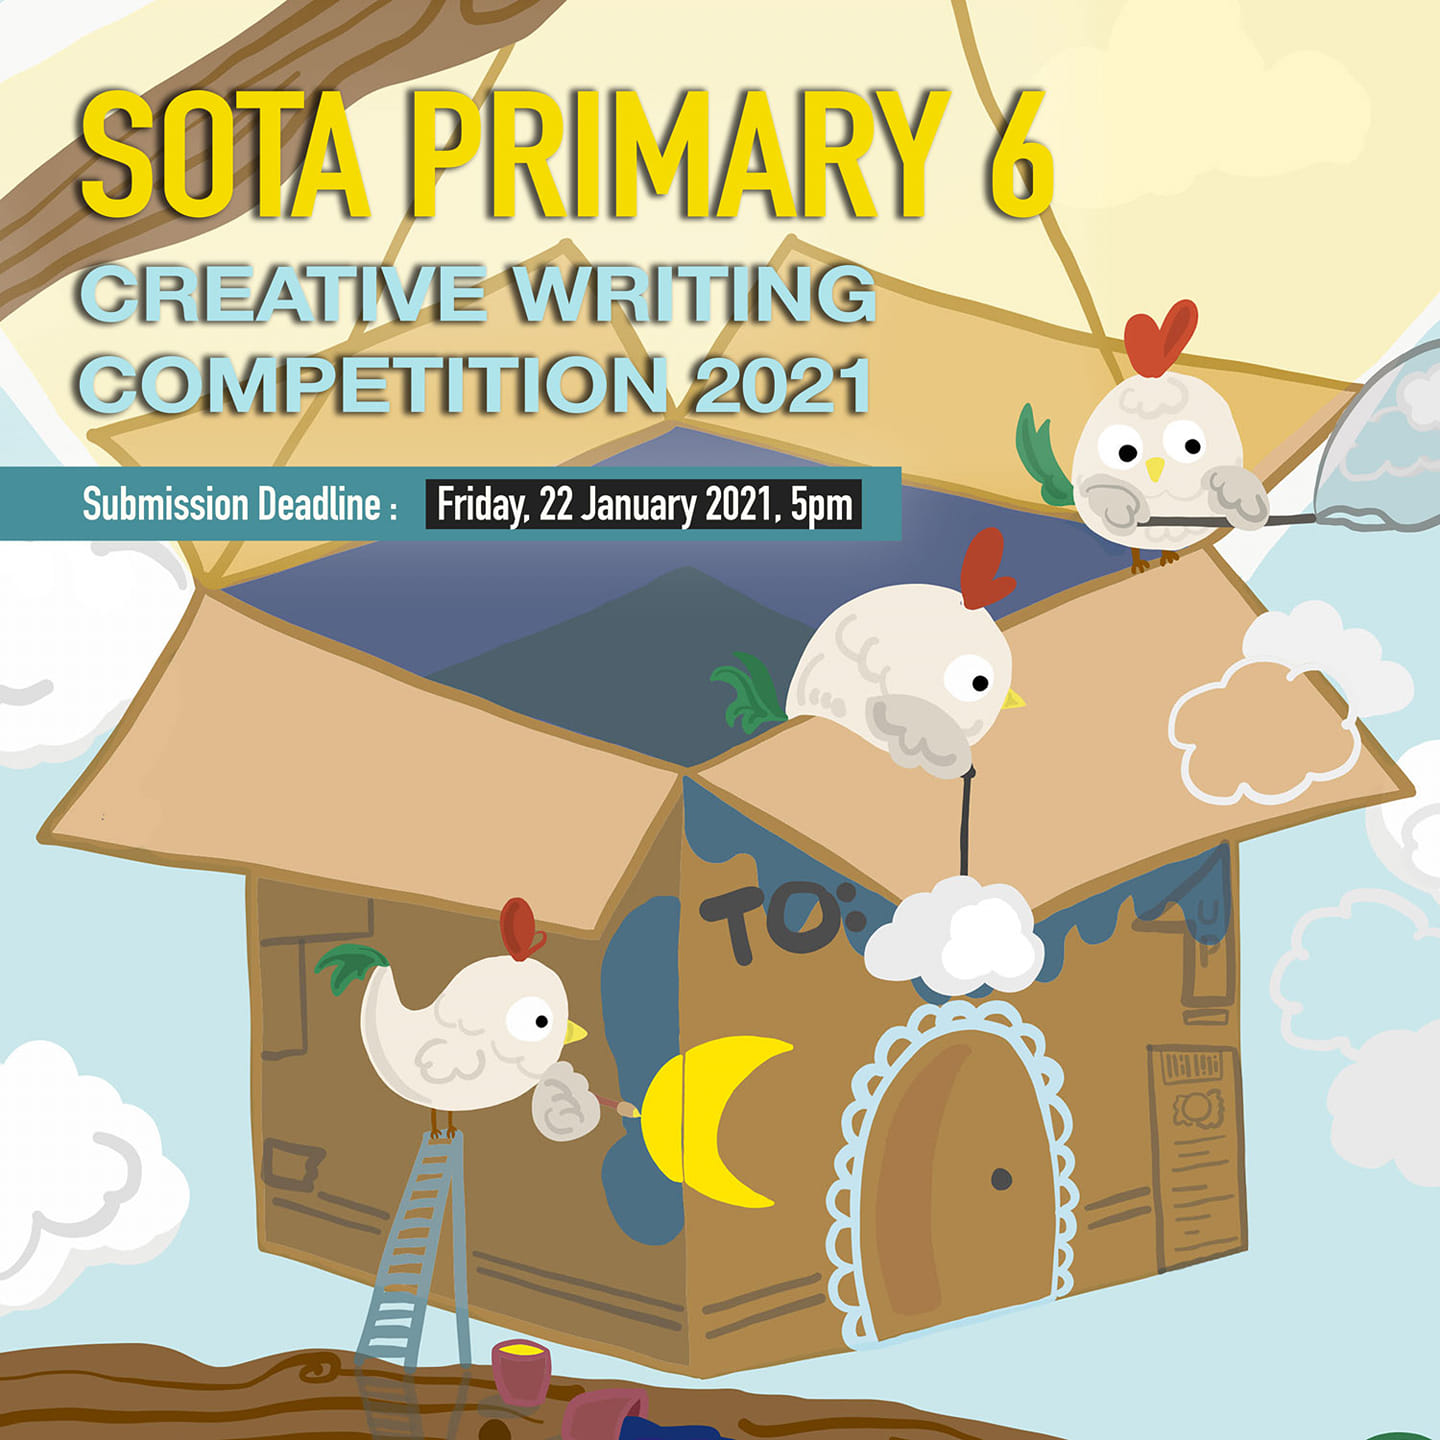 sota creative writing competition 2023